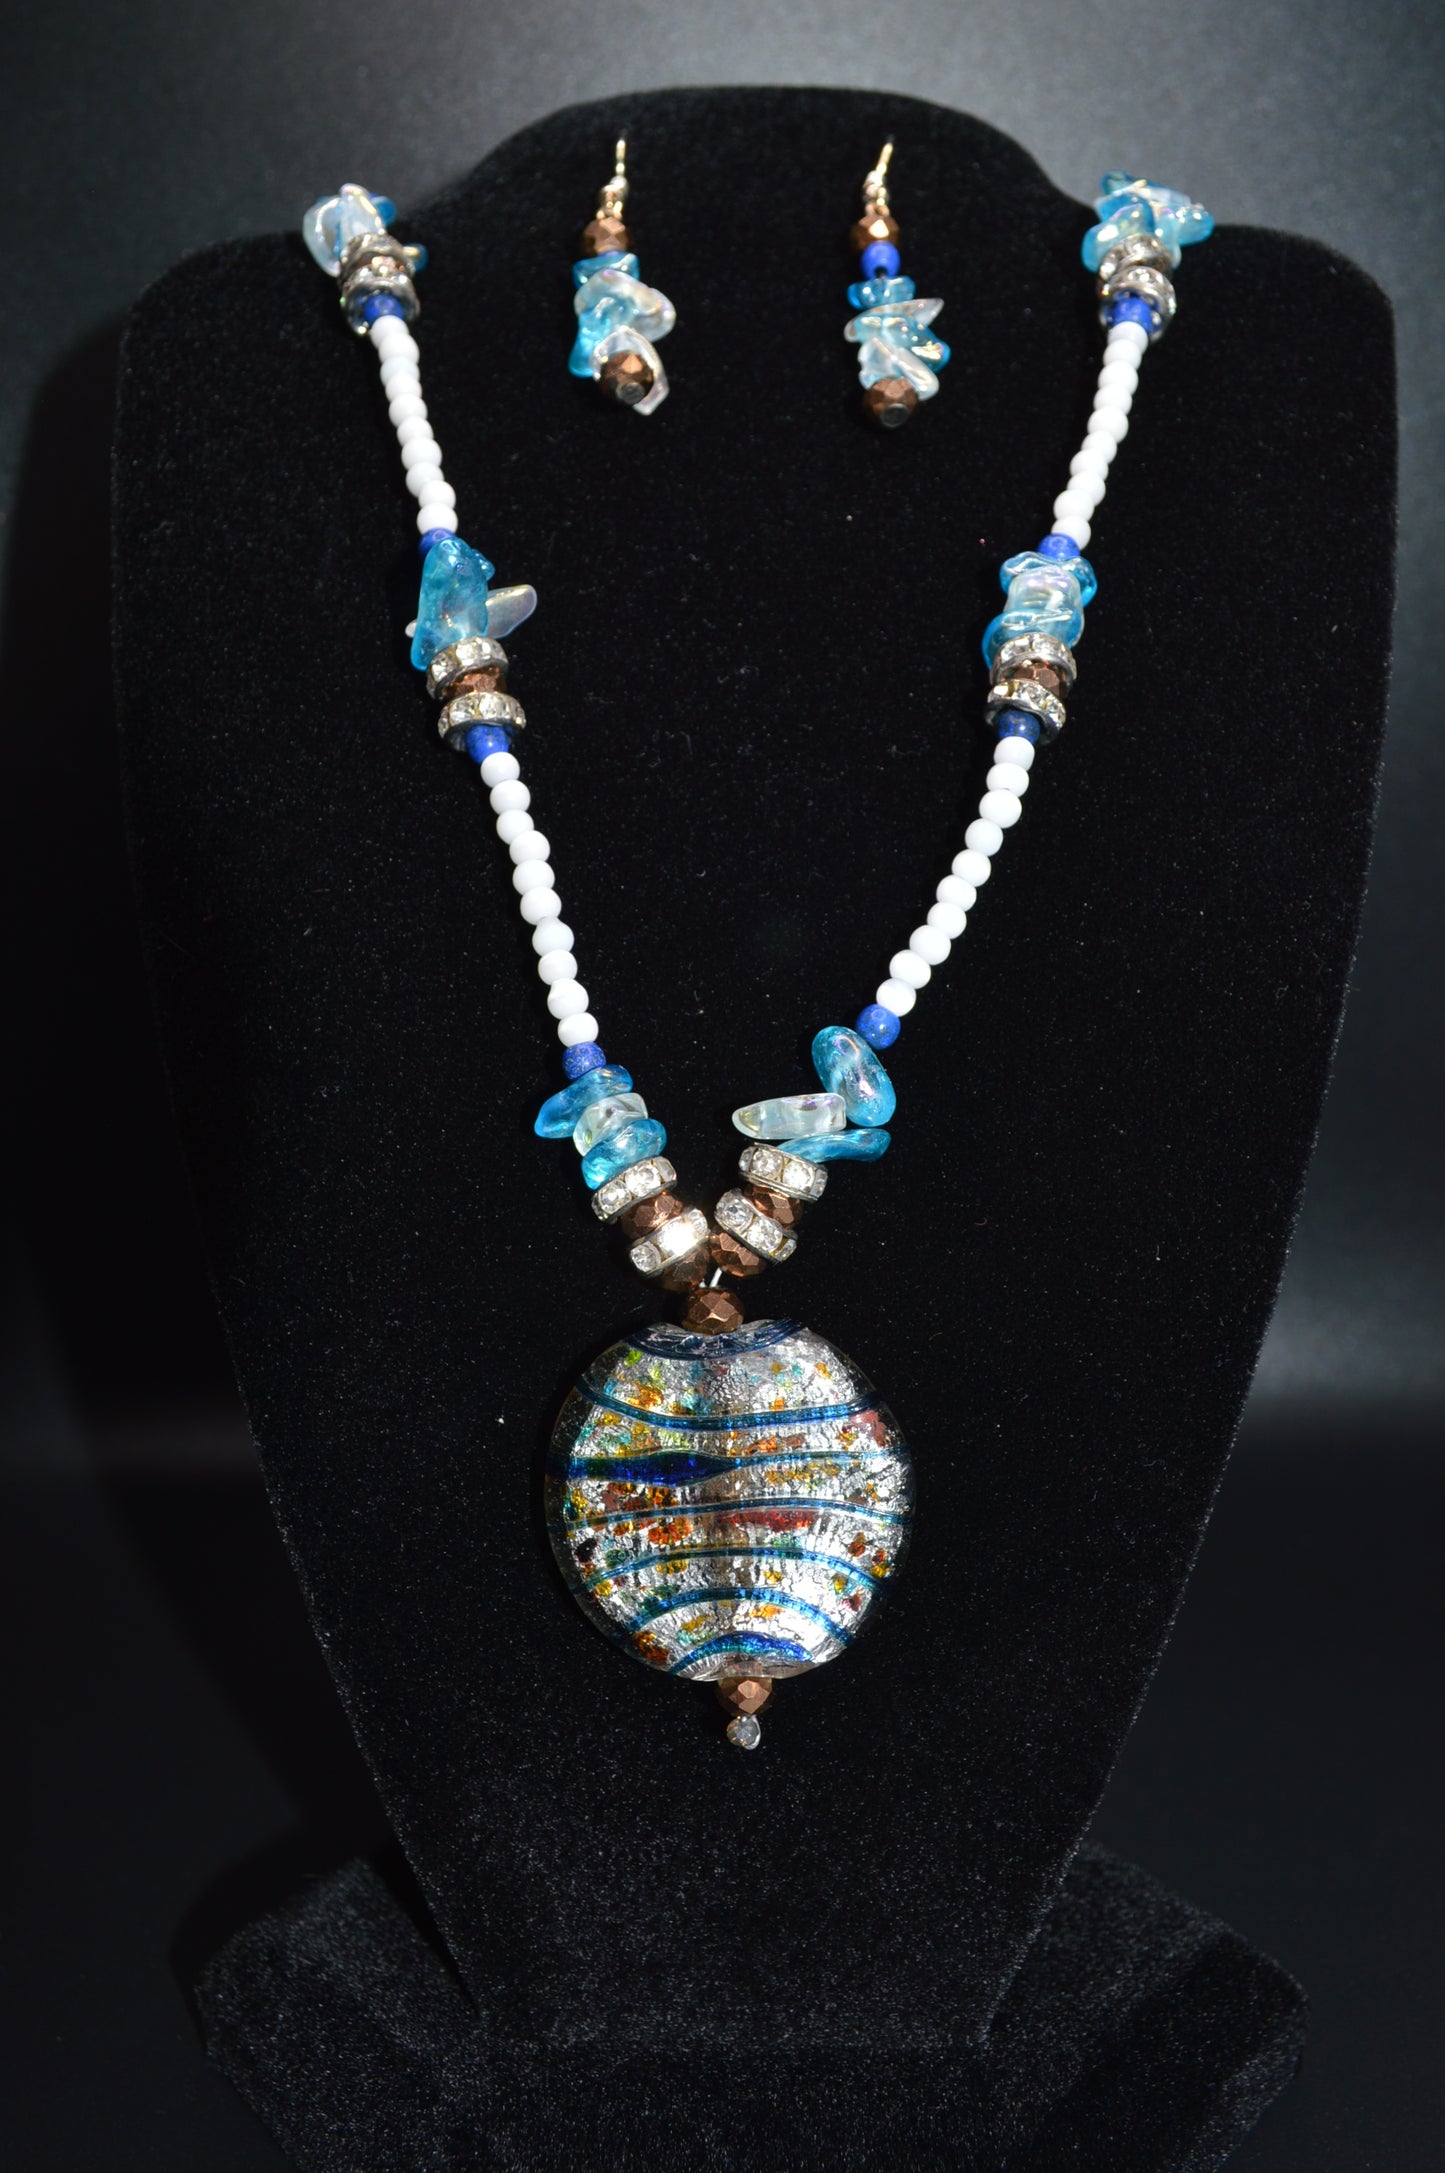 Blue and White Lampworked Glass Necklace and Earring Set